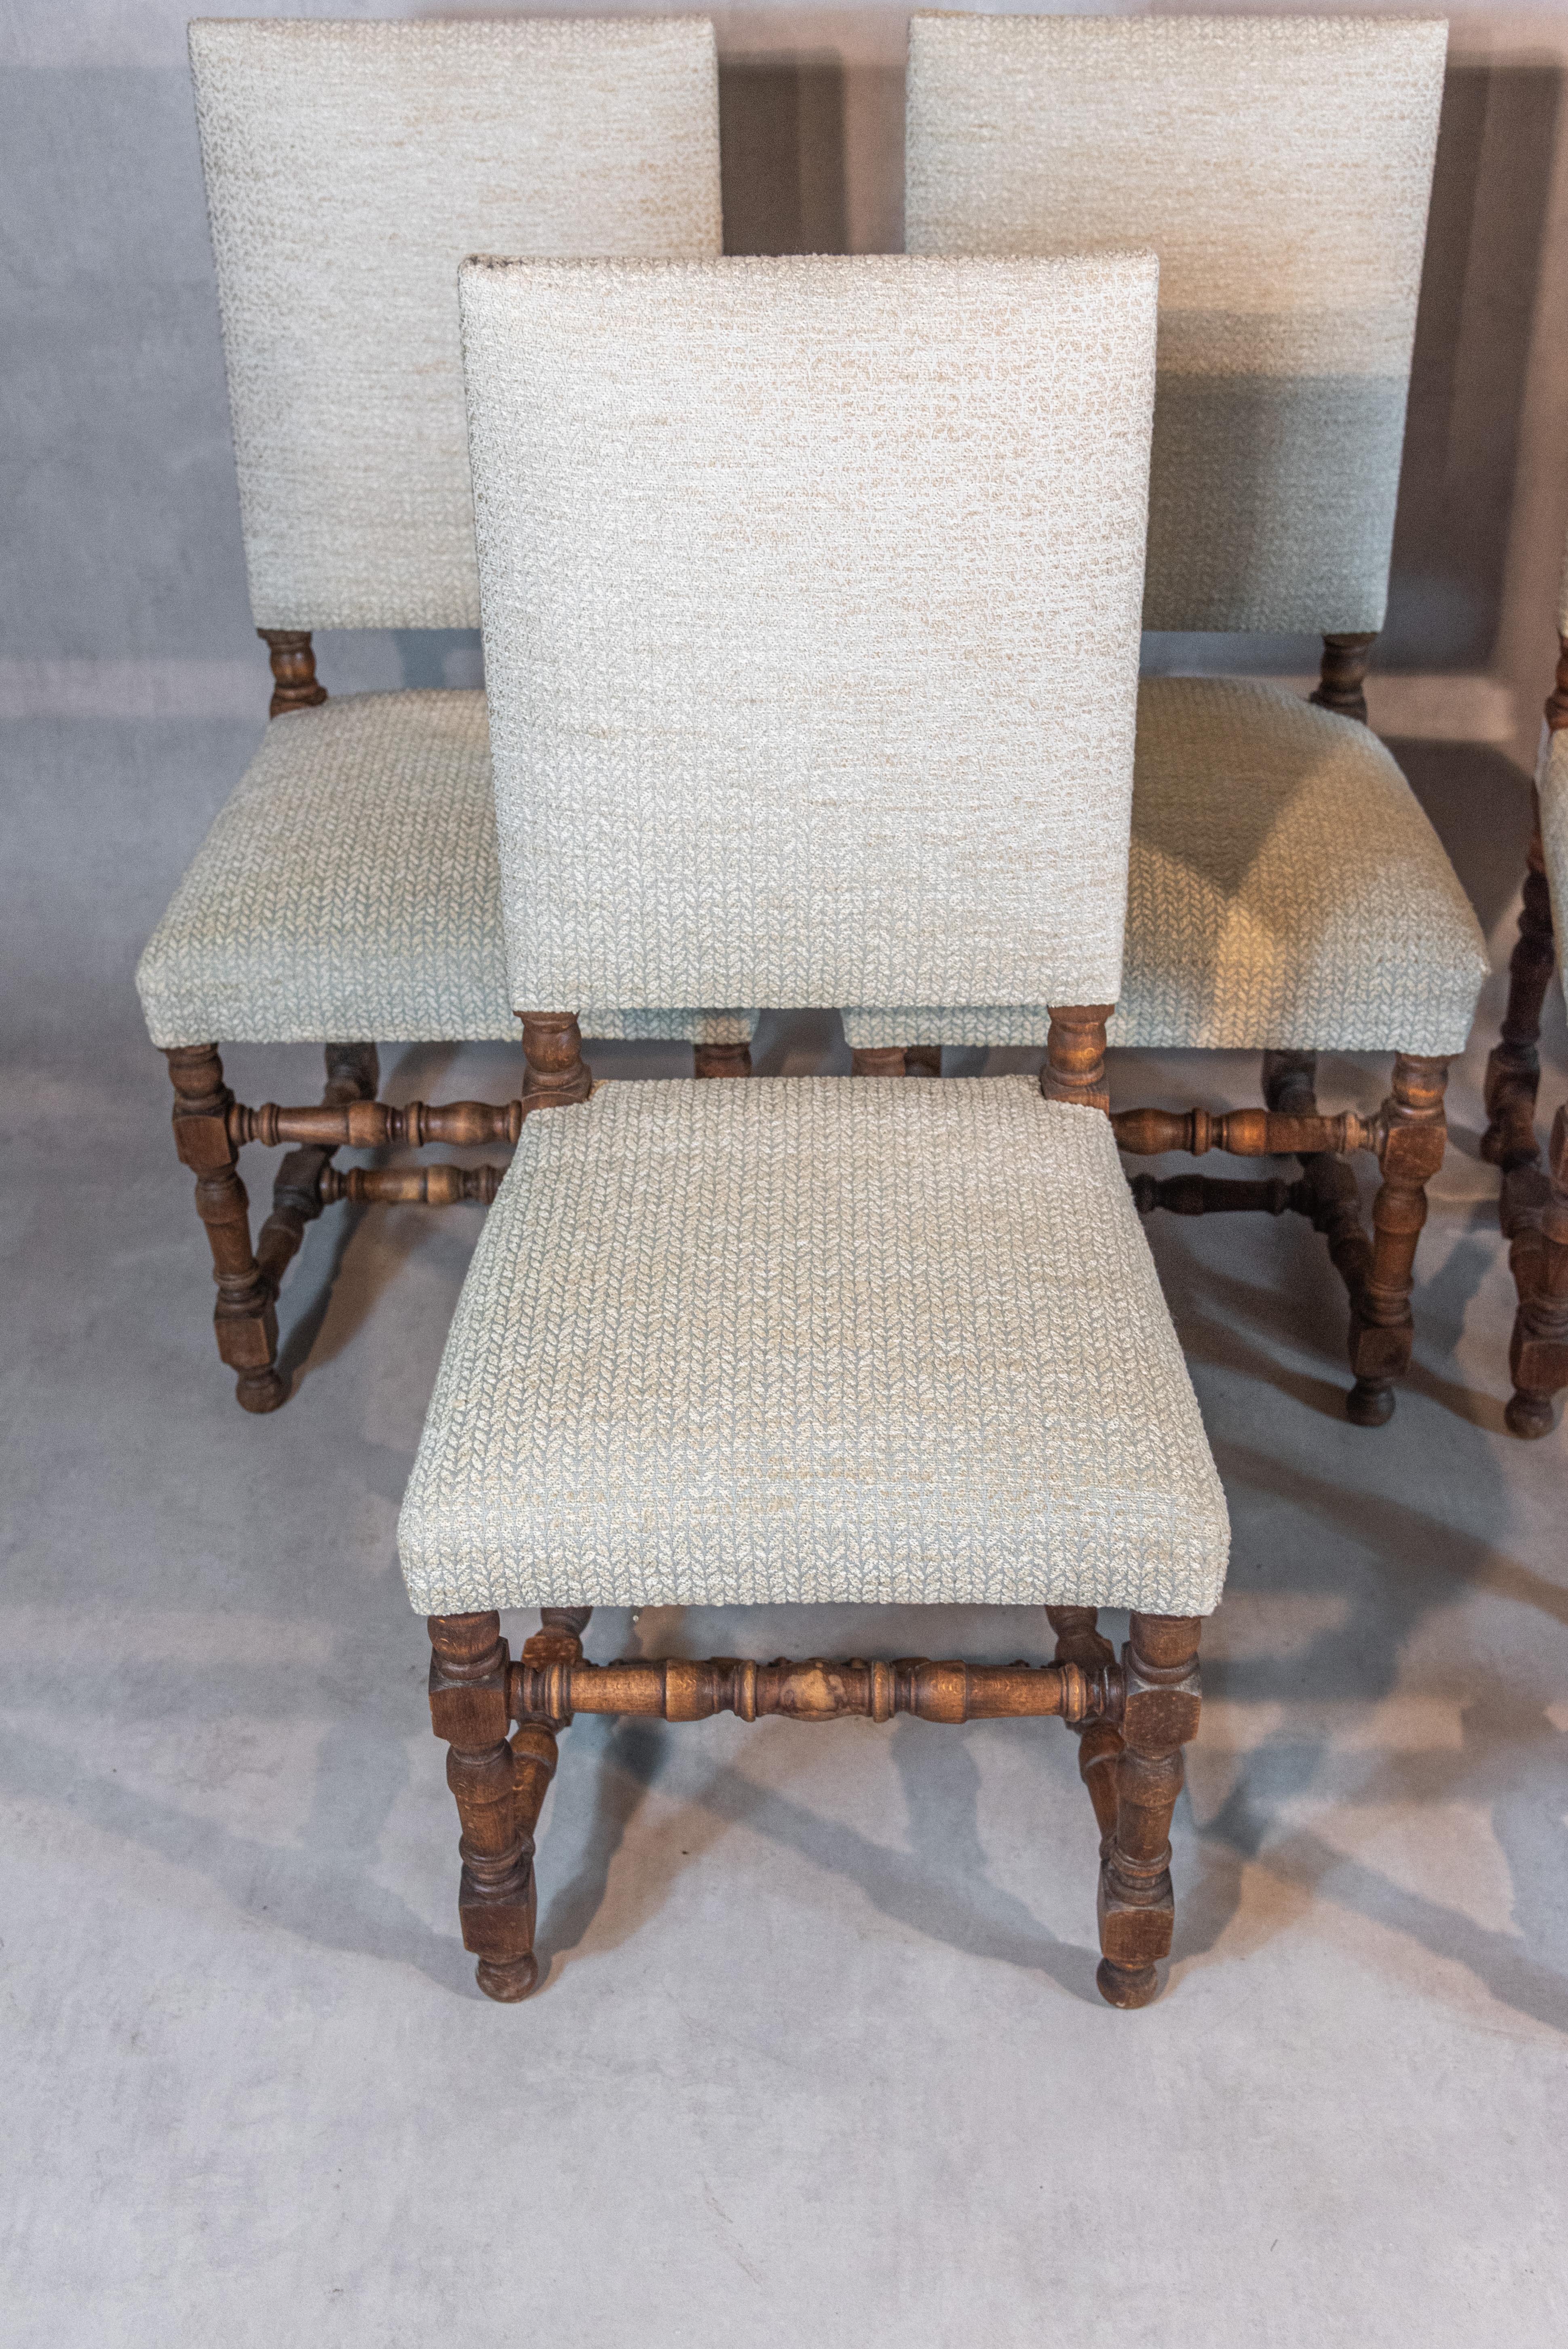 Indulge in the timeless elegance and refinement of this superb set of 8 French Louis XIV Style Dining Chairs, all in mint condition and ready to add a touch of antique charm to your dining space. Crafted from refined beech wood, these chairs boast